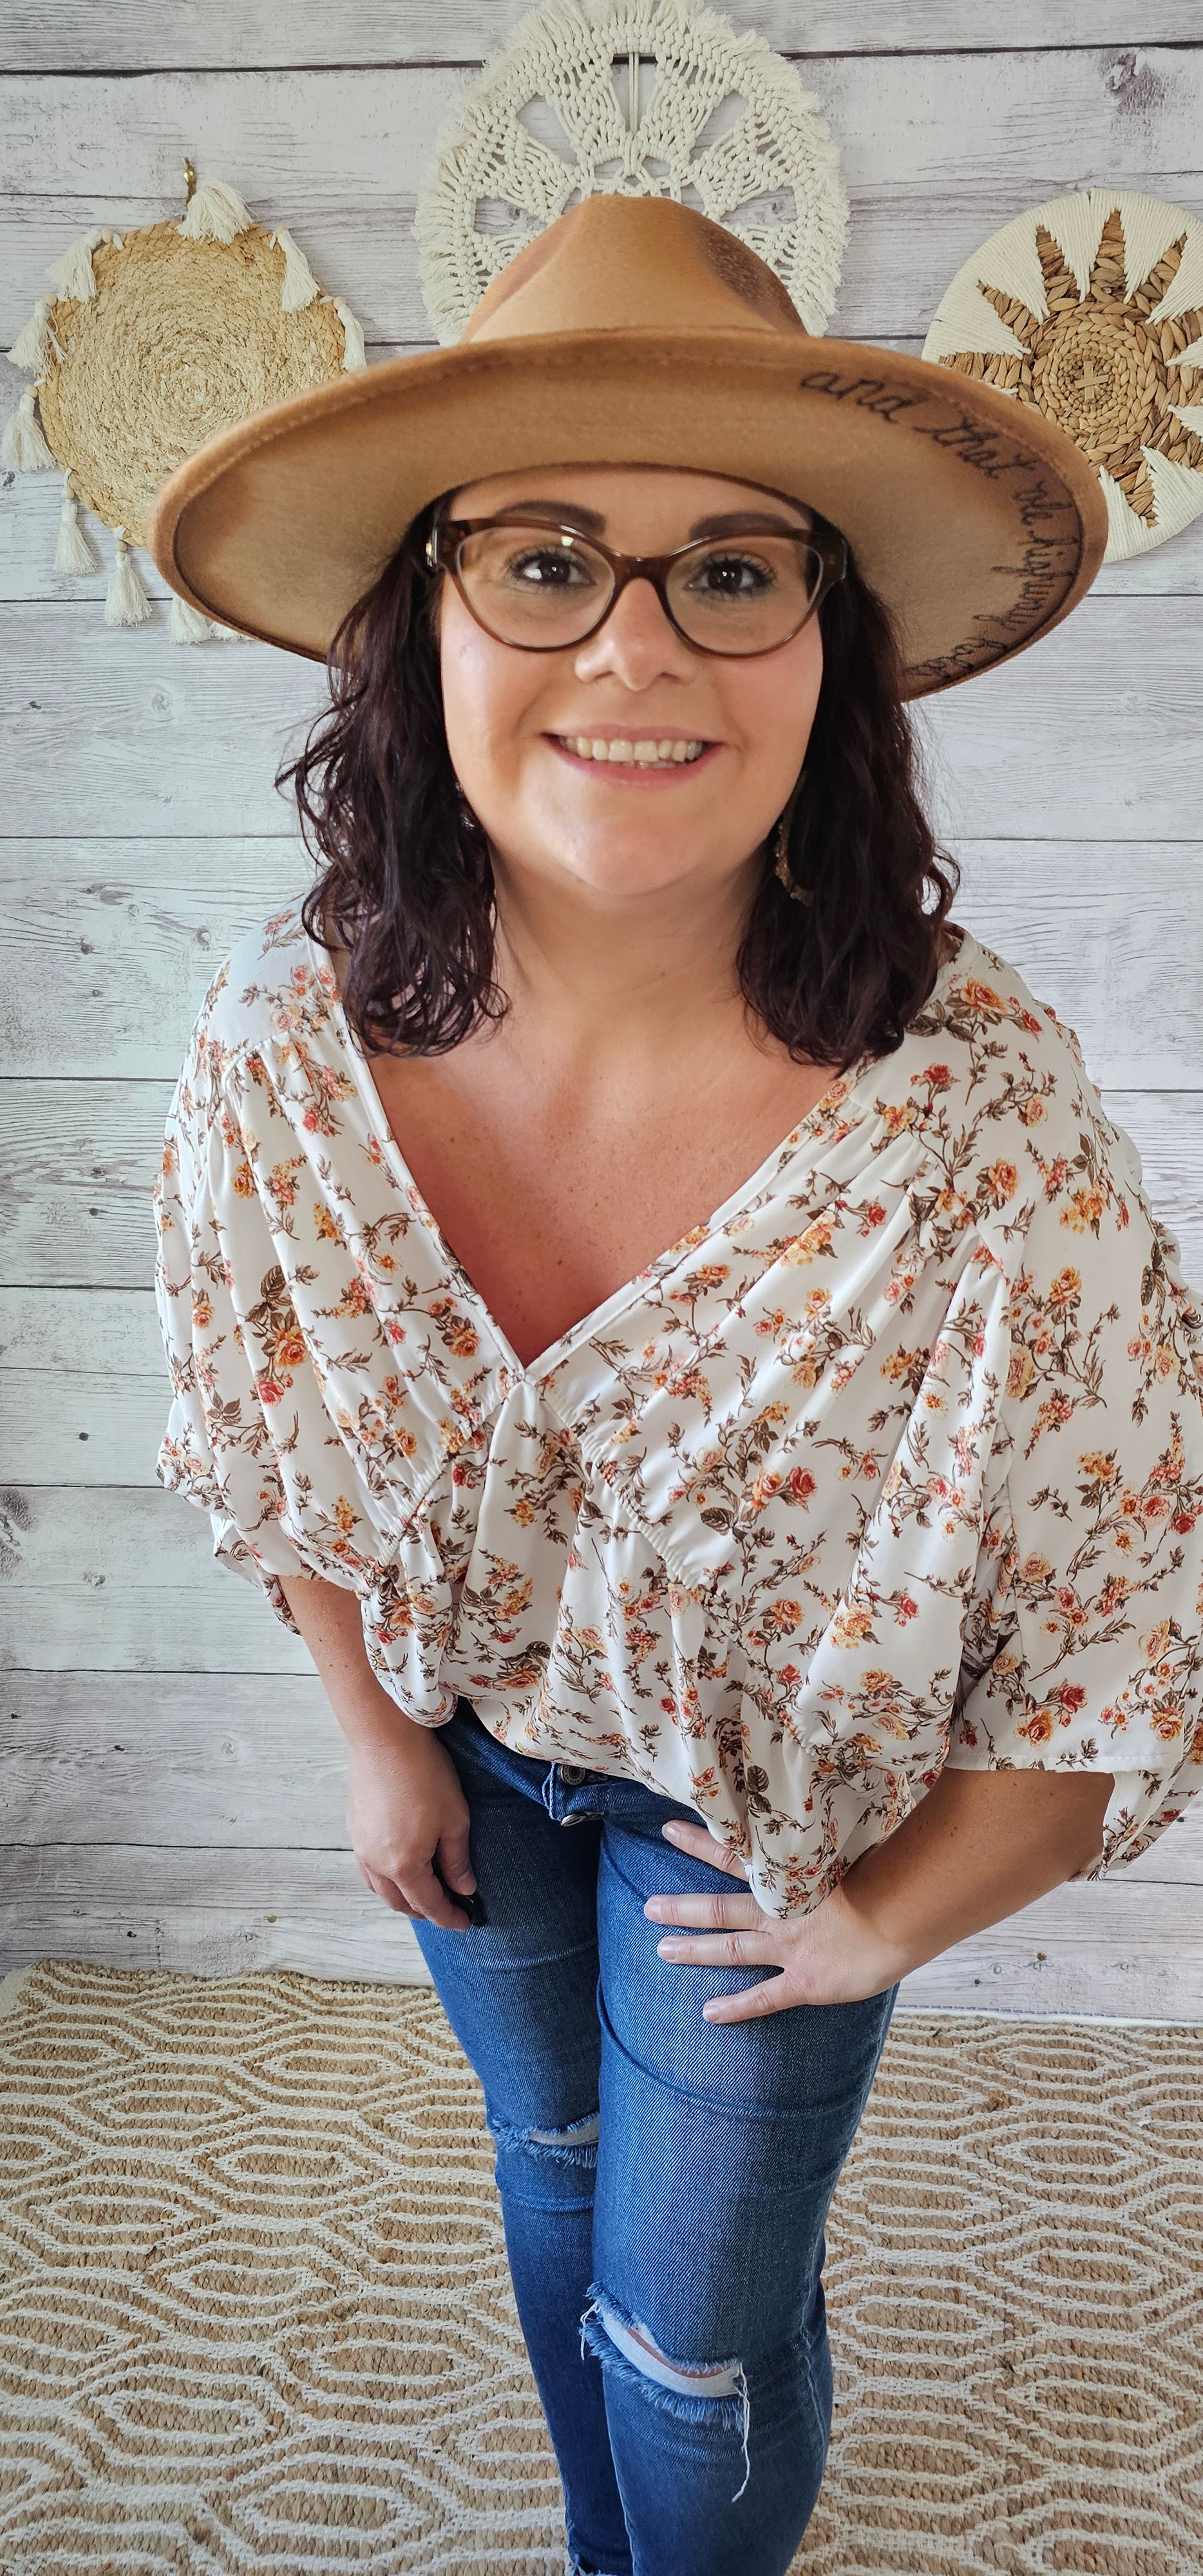 “Rosy Future” is a ivory loose fitting, flowy top. It features a rosy floral print, v-neck and v-back, pleated sleeves. This top is sheer but not see through. It is great for vacation, an evening out or casual event. Sizes small through large.